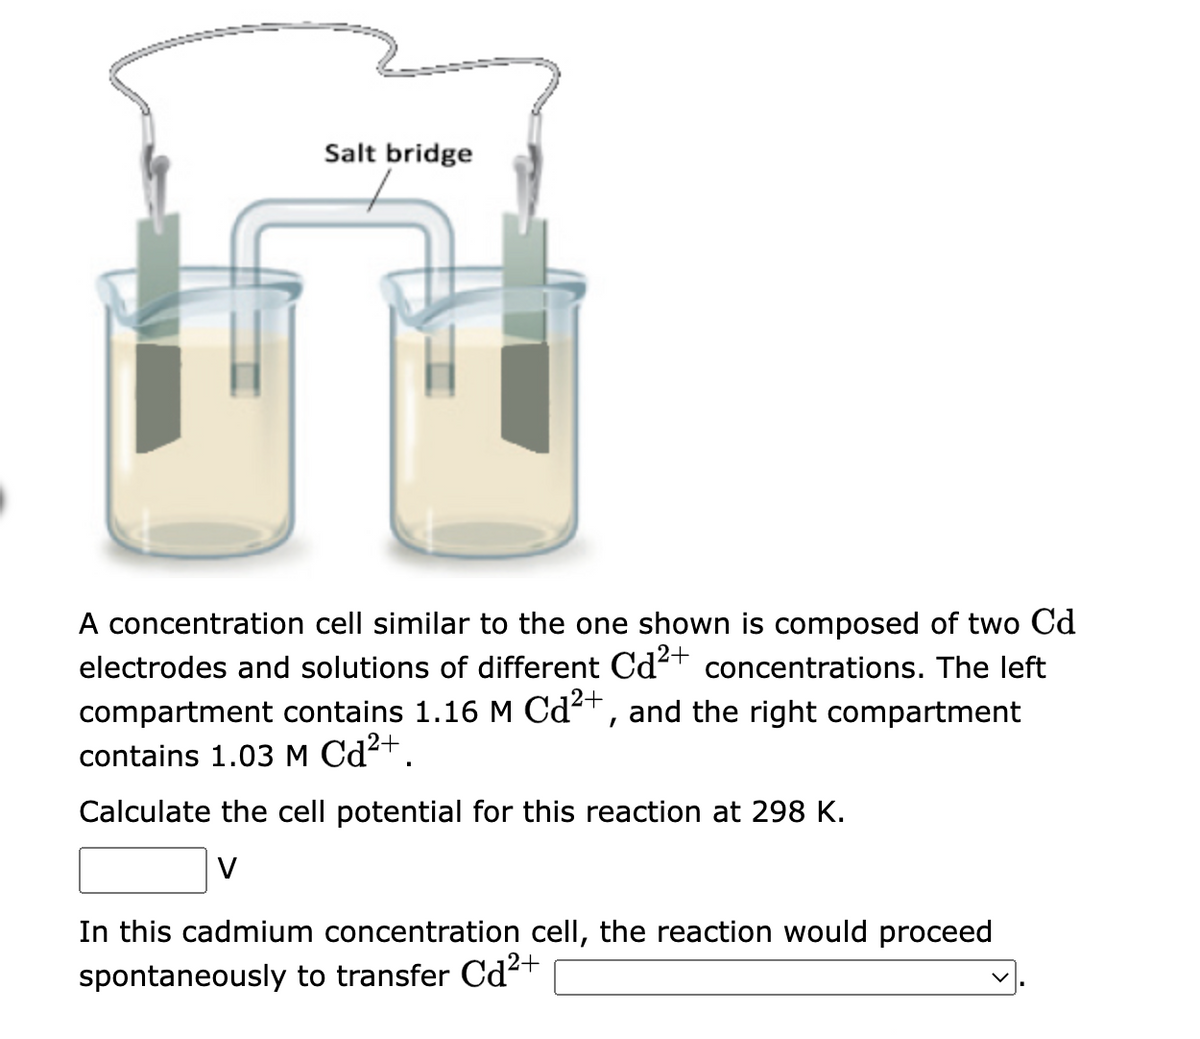 Salt bridge
A concentration cell similar to the one shown is composed of two Cd
electrodes and solutions of different Cd²+ concentrations. The left
compartment contains 1.16 M Cd²+, and the right compartment
contains 1.03 M Cd²+.
Calculate the cell potential for this reaction at 298 K.
V
In this cadmium concentration cell, the reaction would proceed
spontaneously to transfer Cd²+